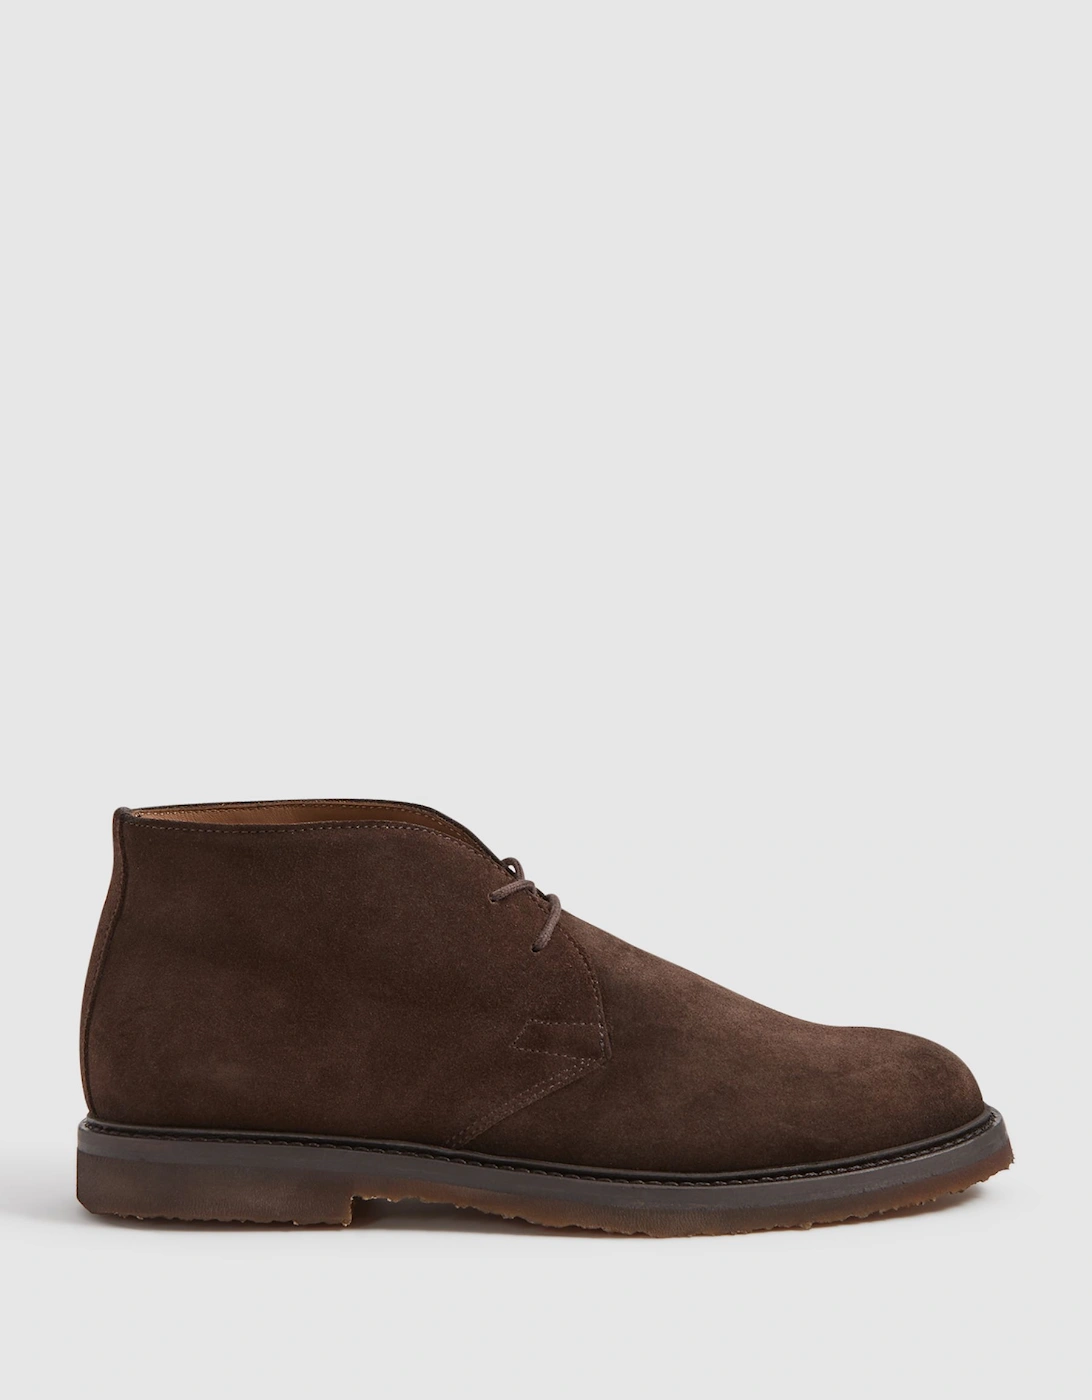 Harrys London Suede Chukka Boots, 2 of 1